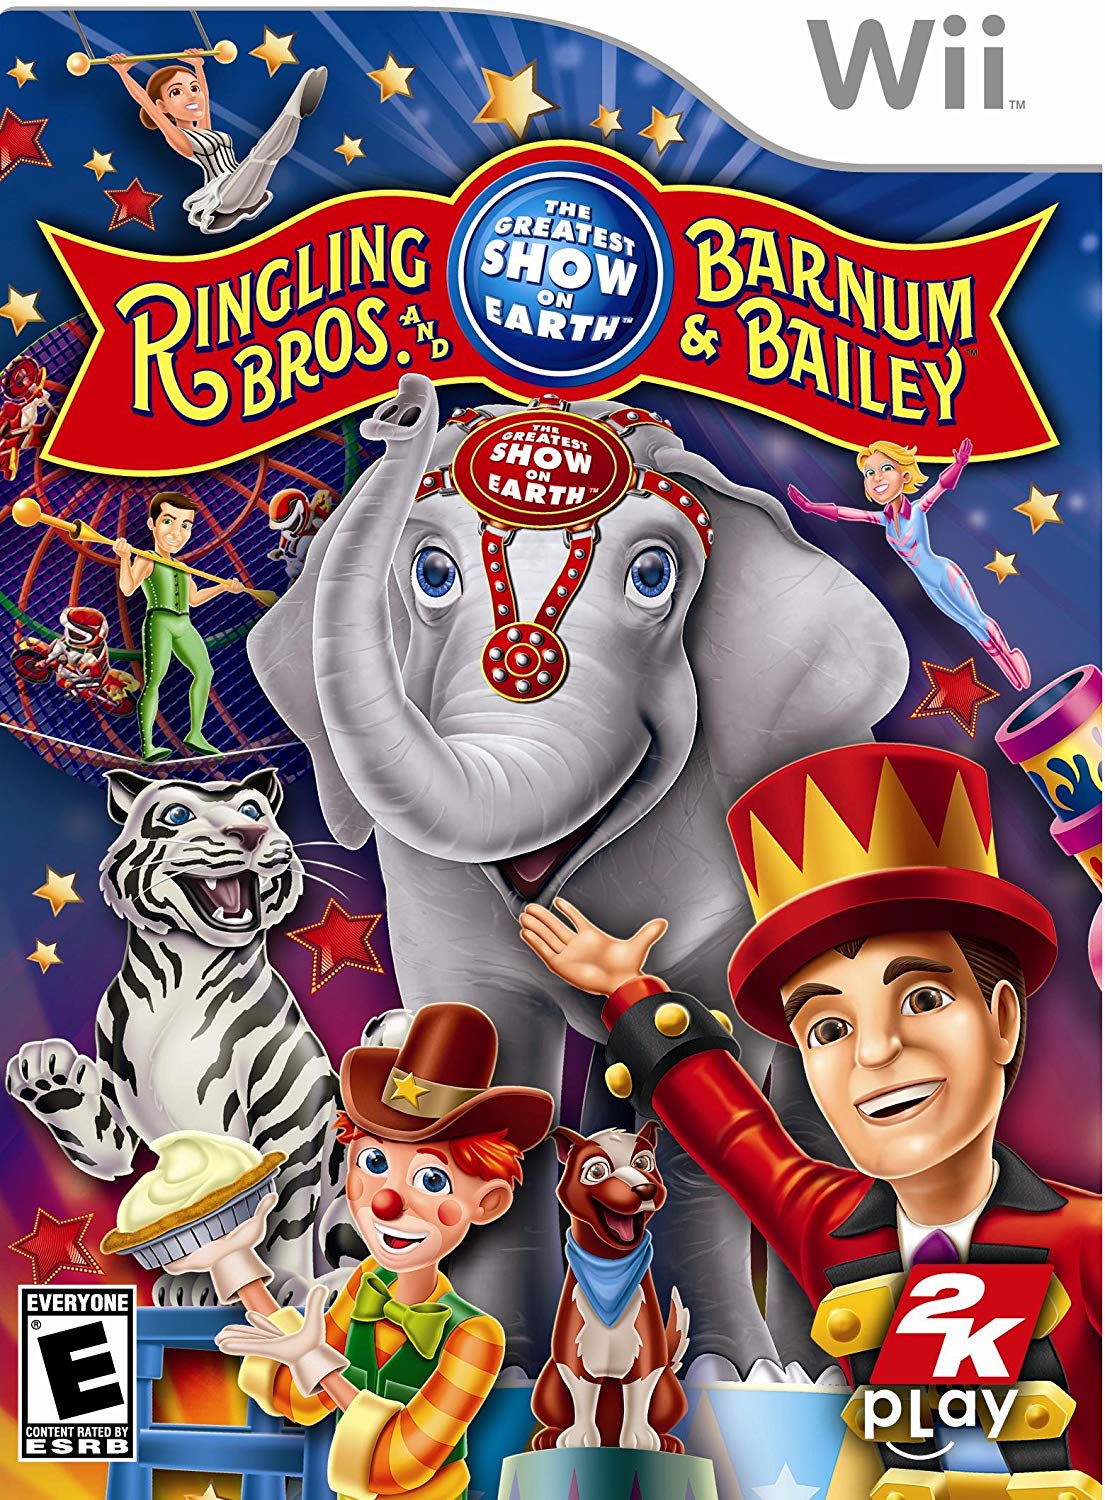 WII: RINGLING BROS AND BARNUM AND BAILEY (COMPLETE)